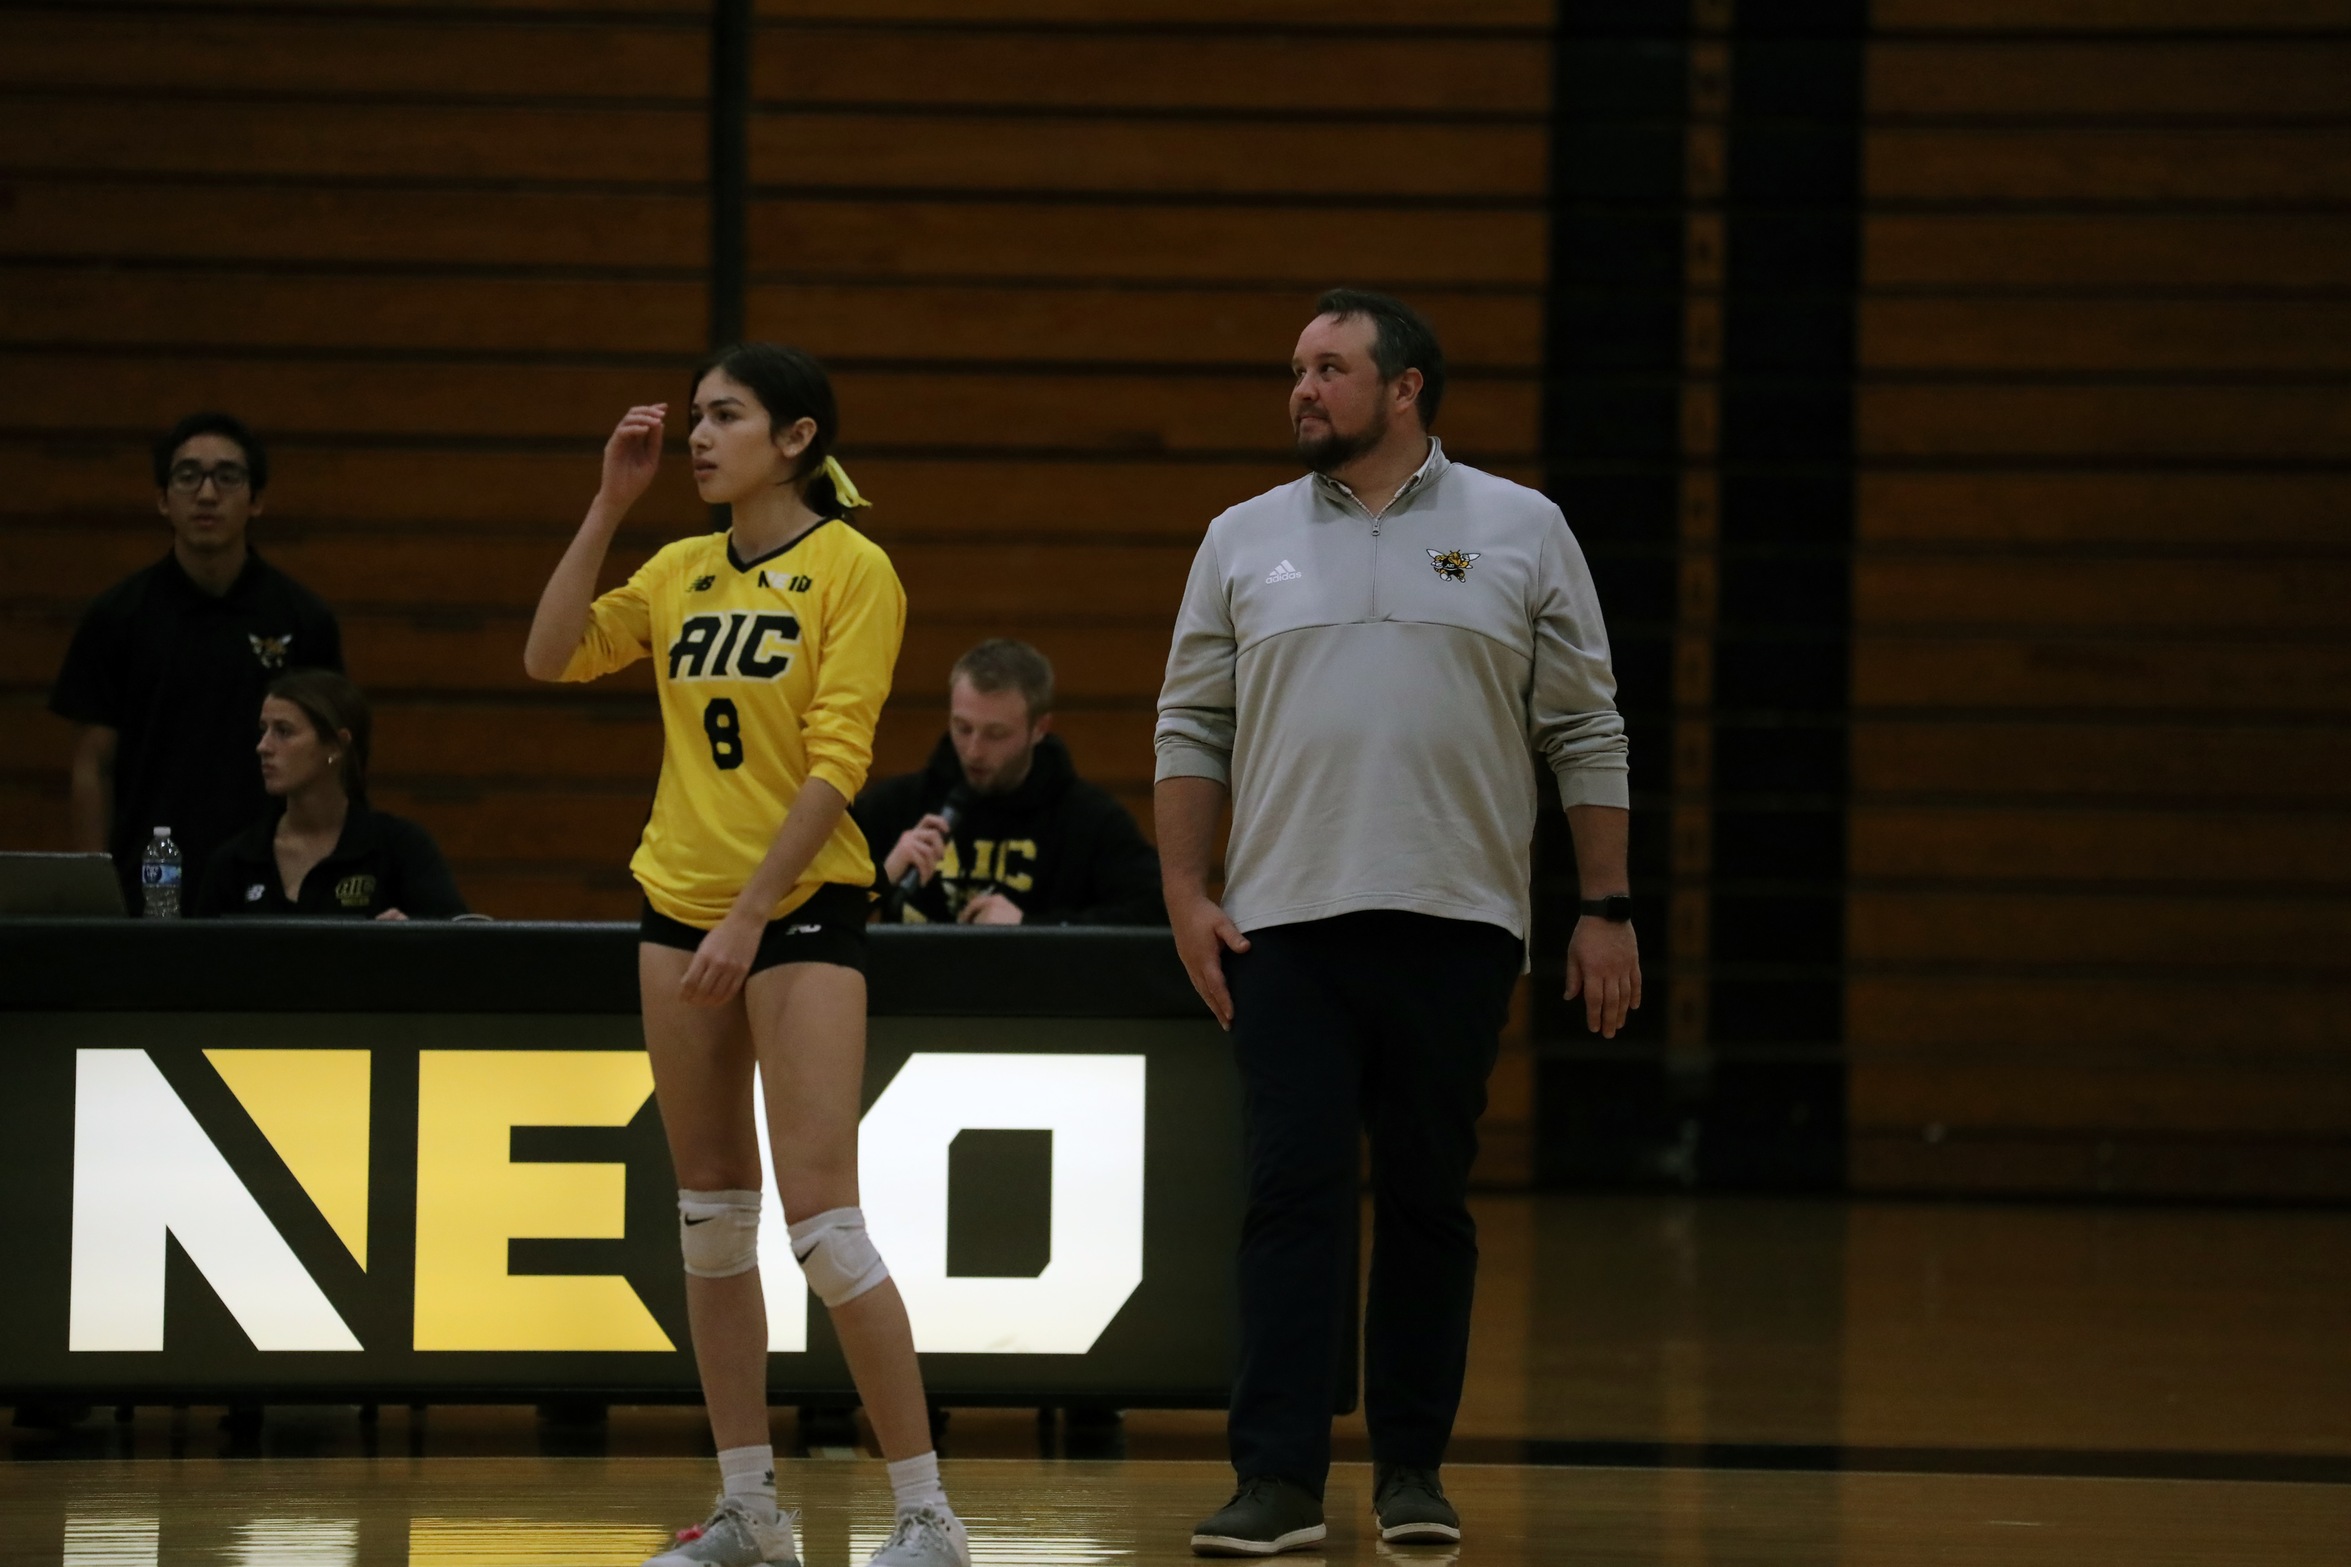 Cribbin to take reins of Men's Volleyball